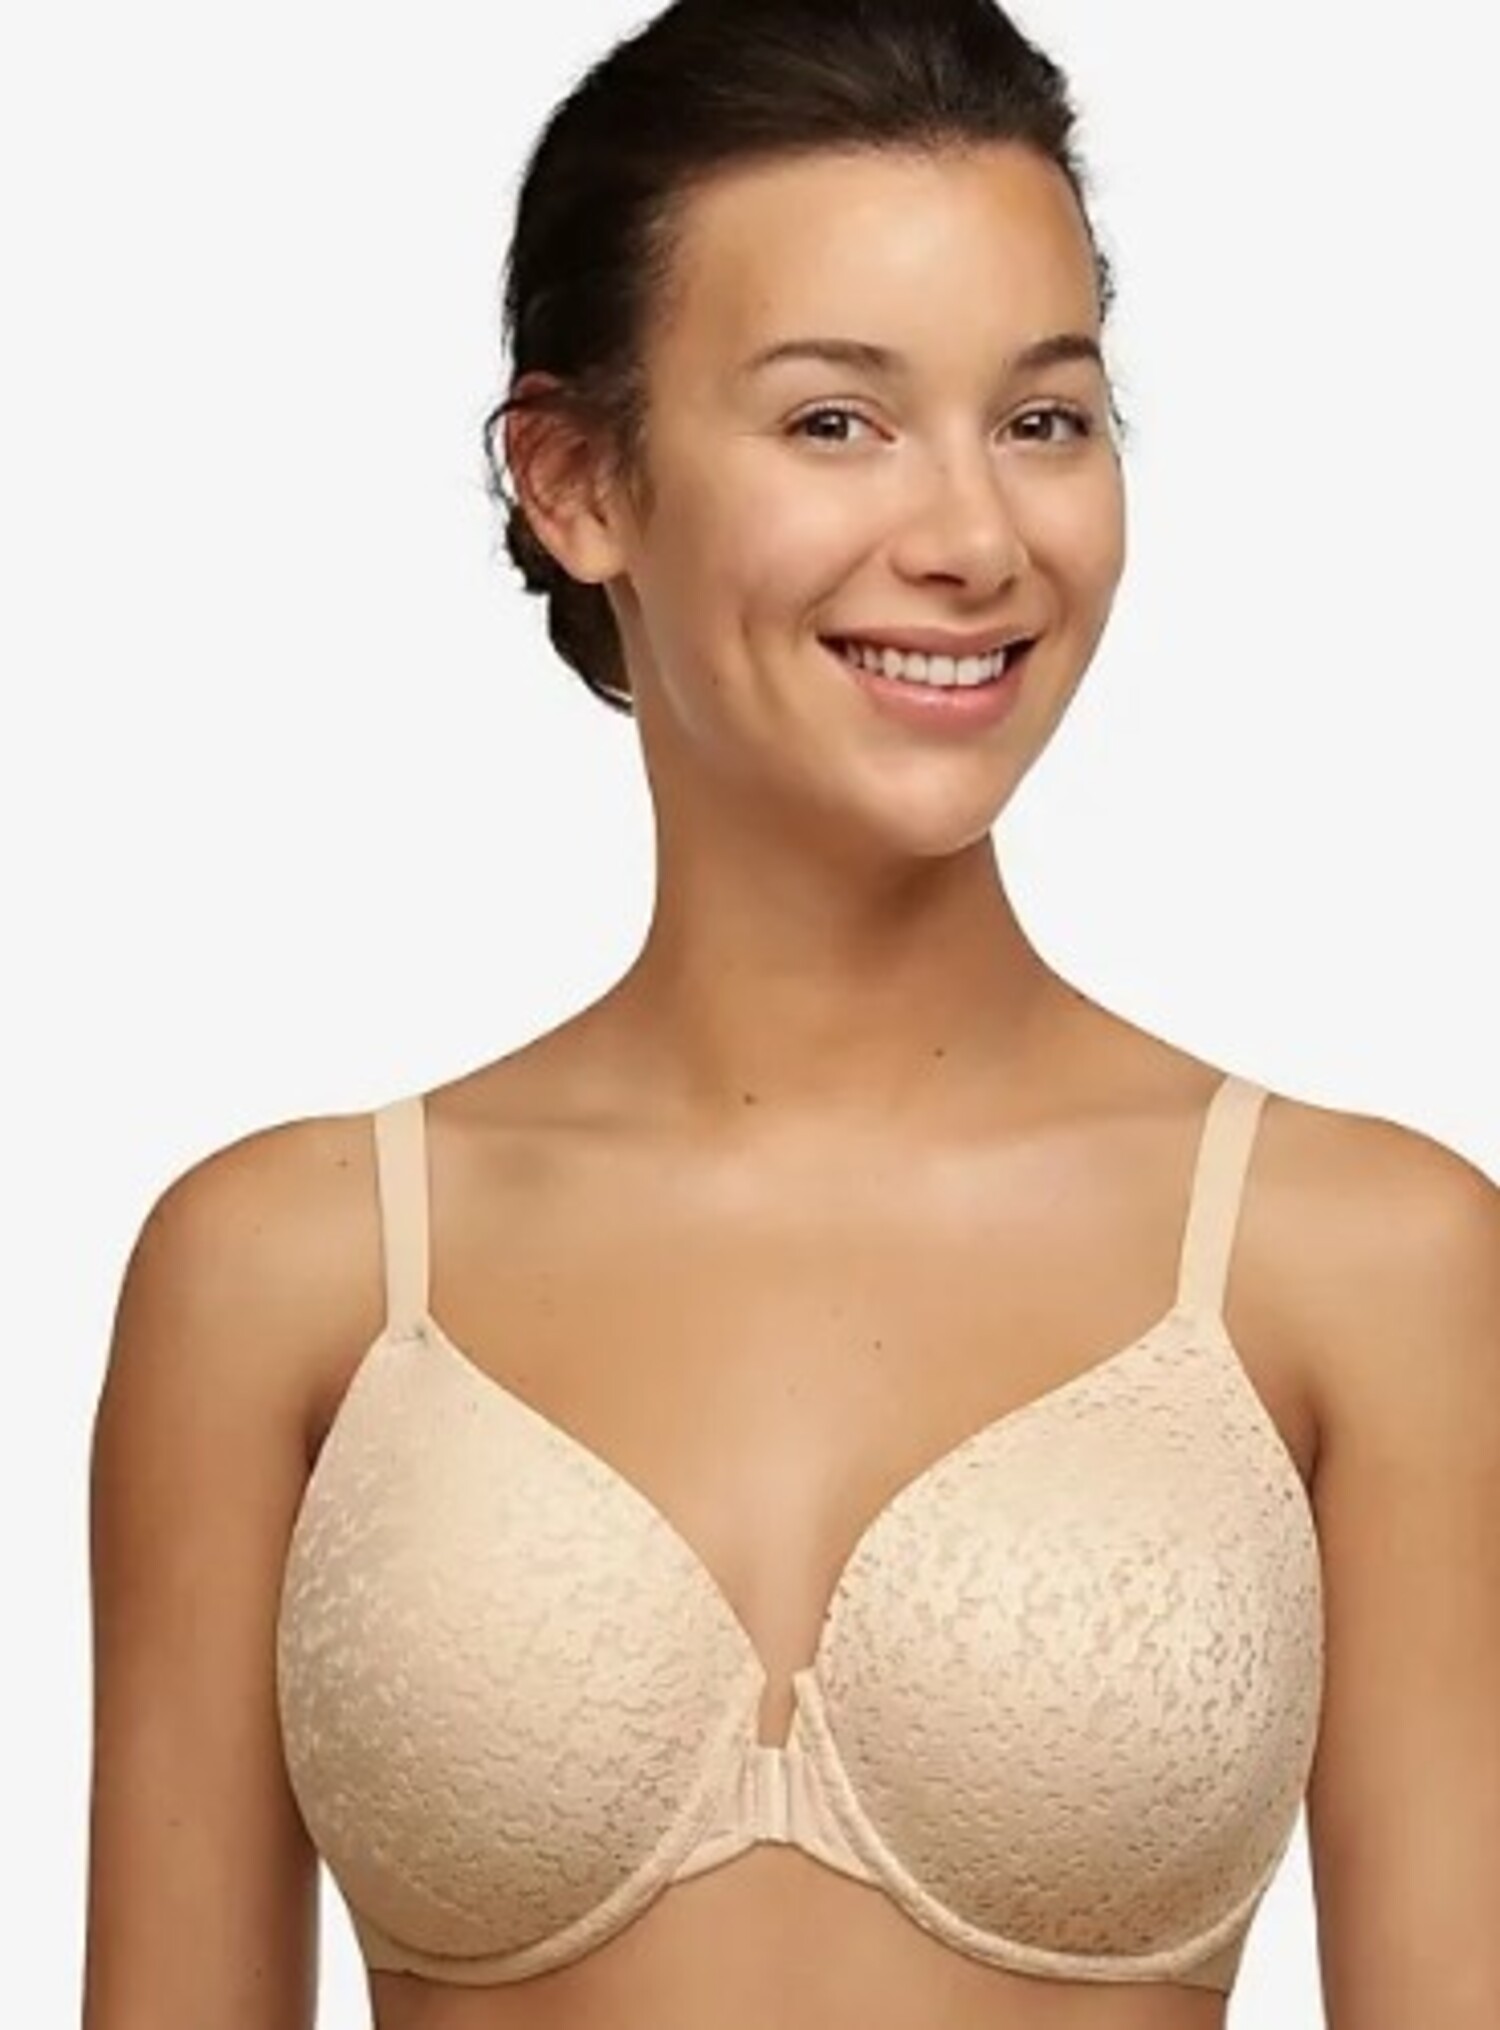 38ddd Bras, Shop The Largest Collection